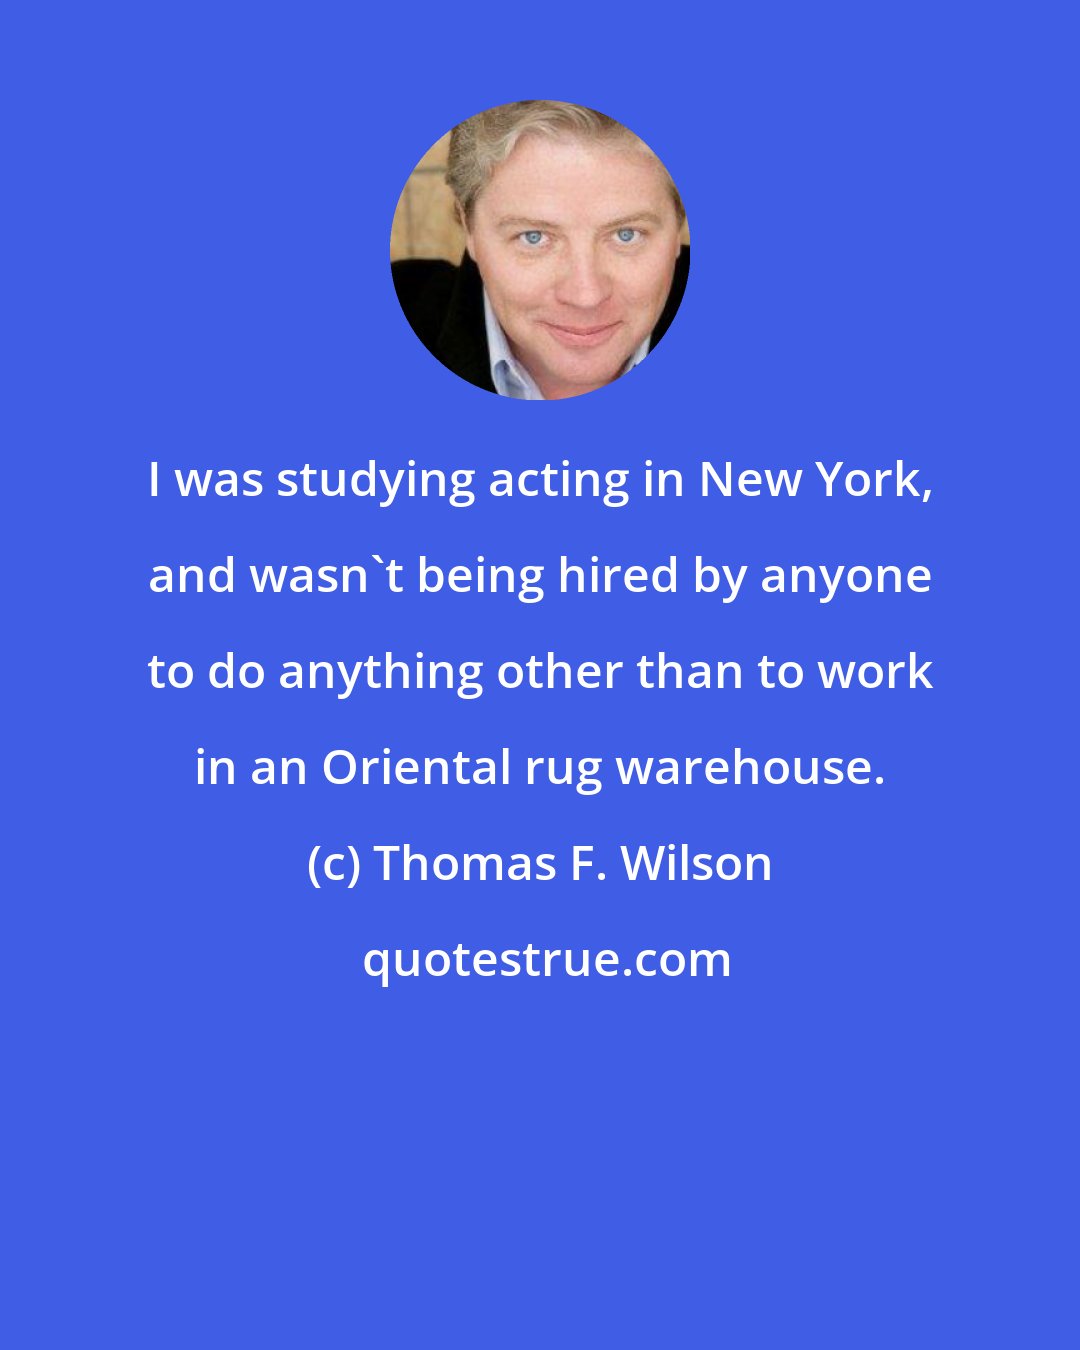 Thomas F. Wilson: I was studying acting in New York, and wasn't being hired by anyone to do anything other than to work in an Oriental rug warehouse.